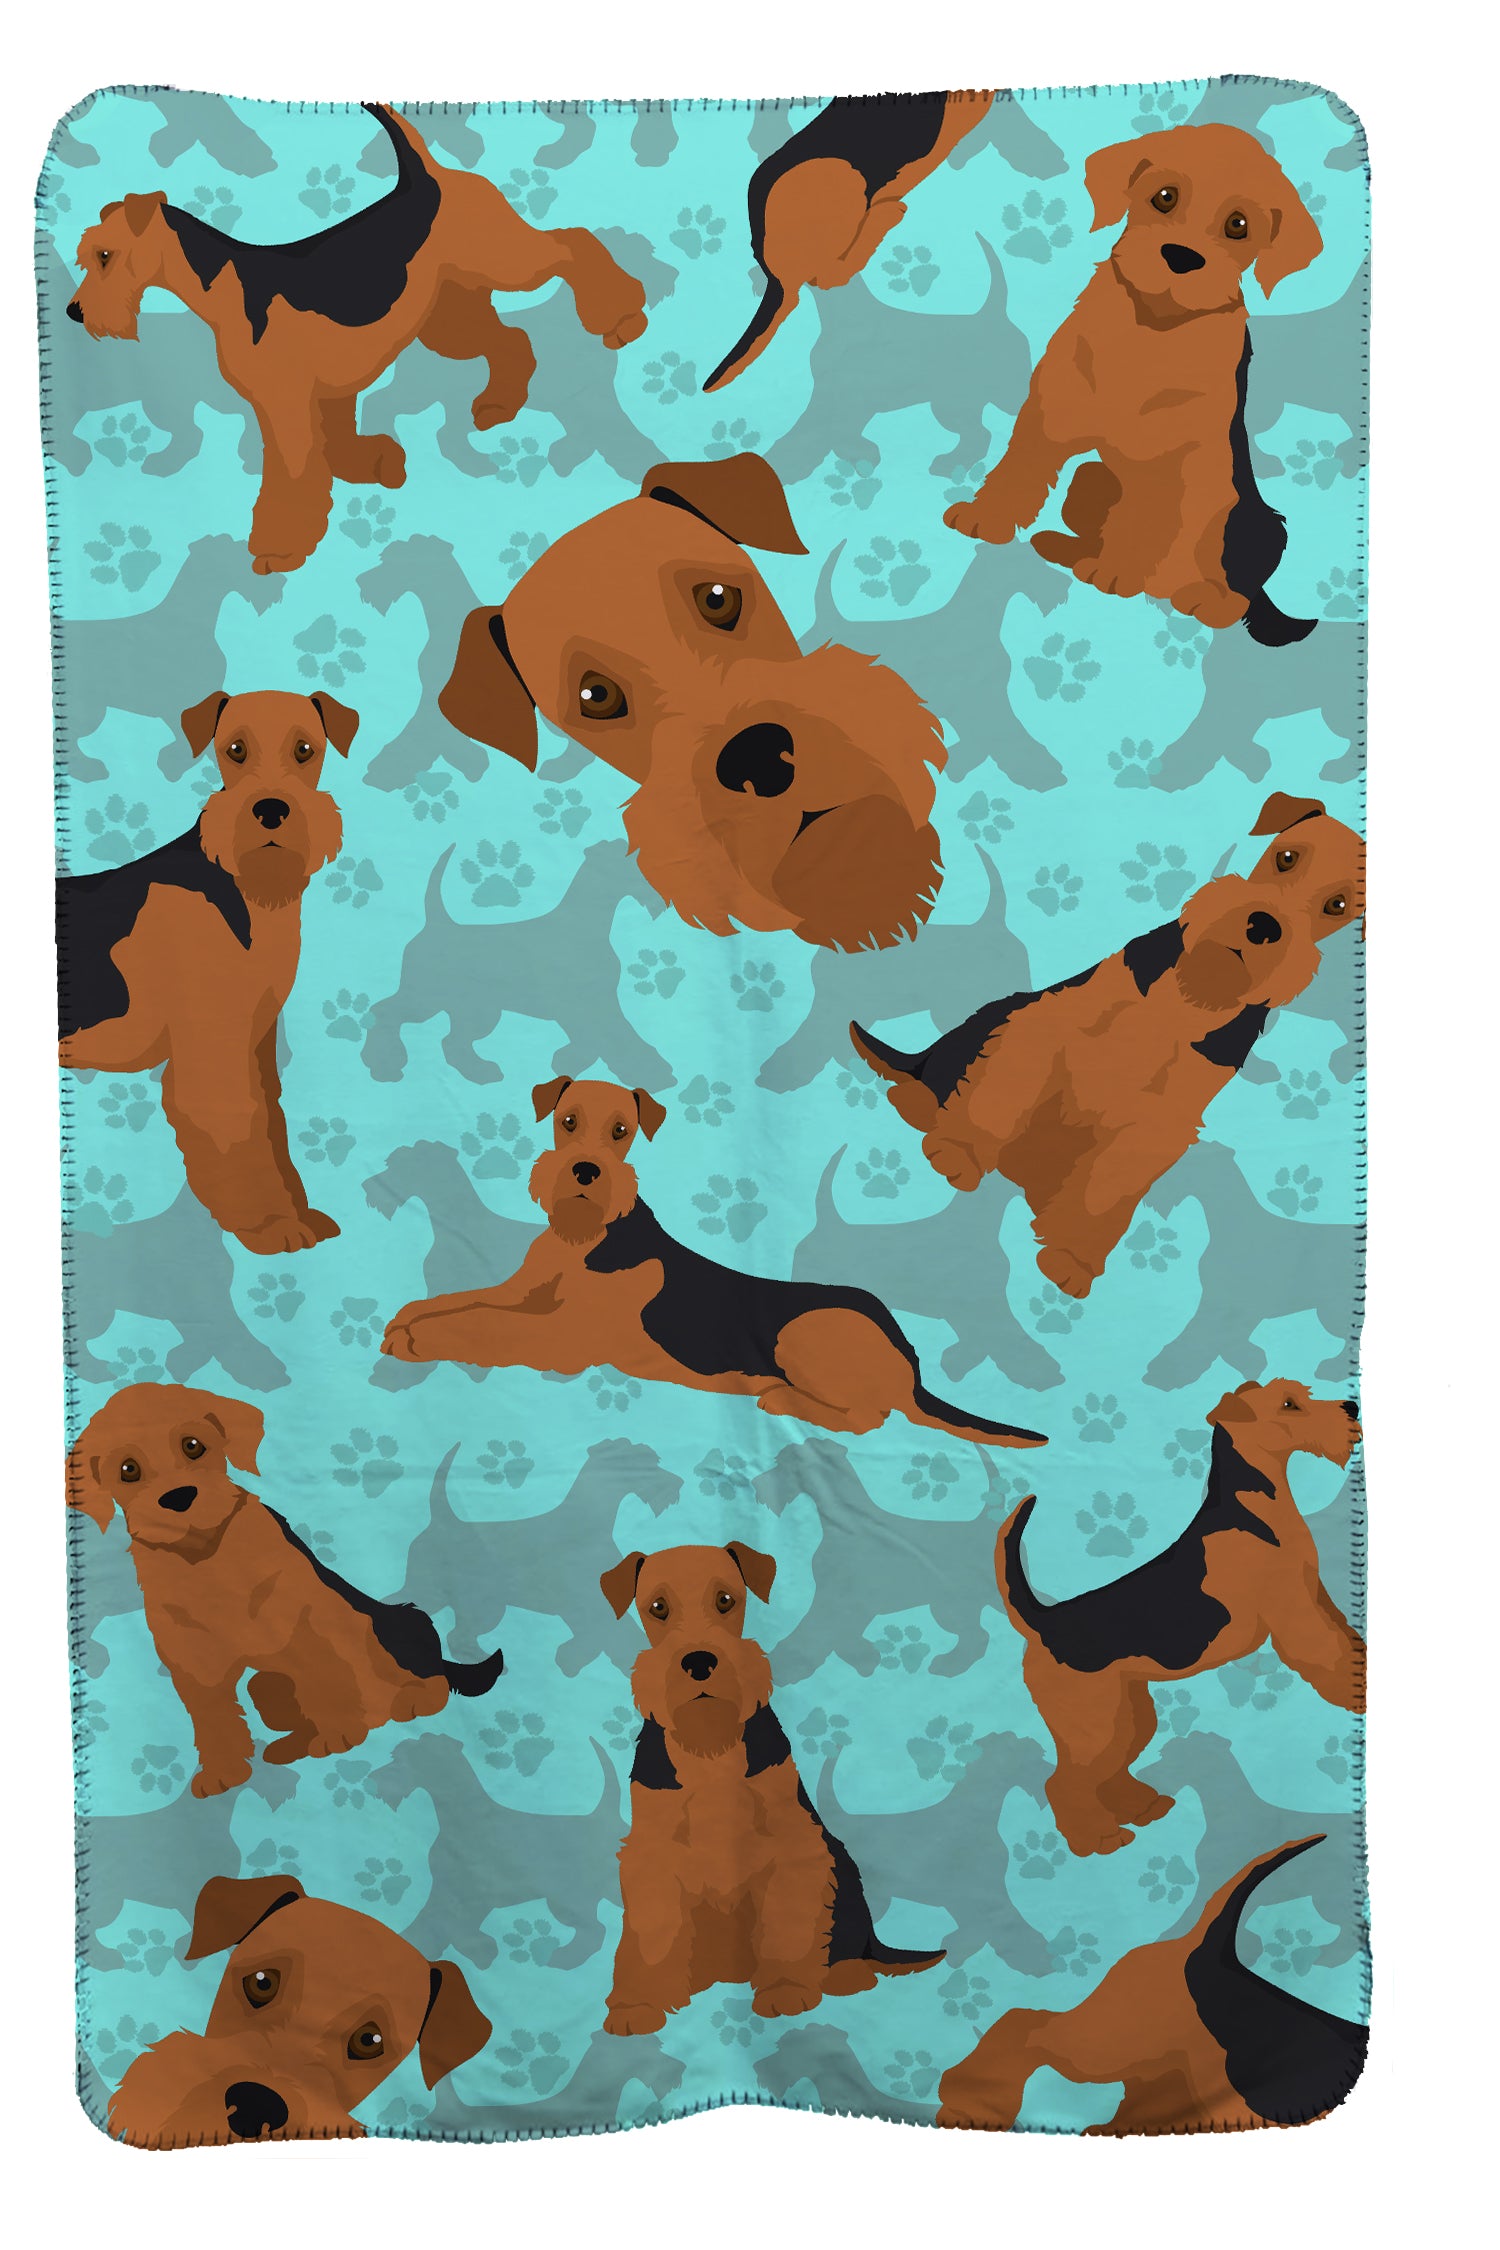 Buy this Airedale Terrier Soft Travel Blanket with Bag